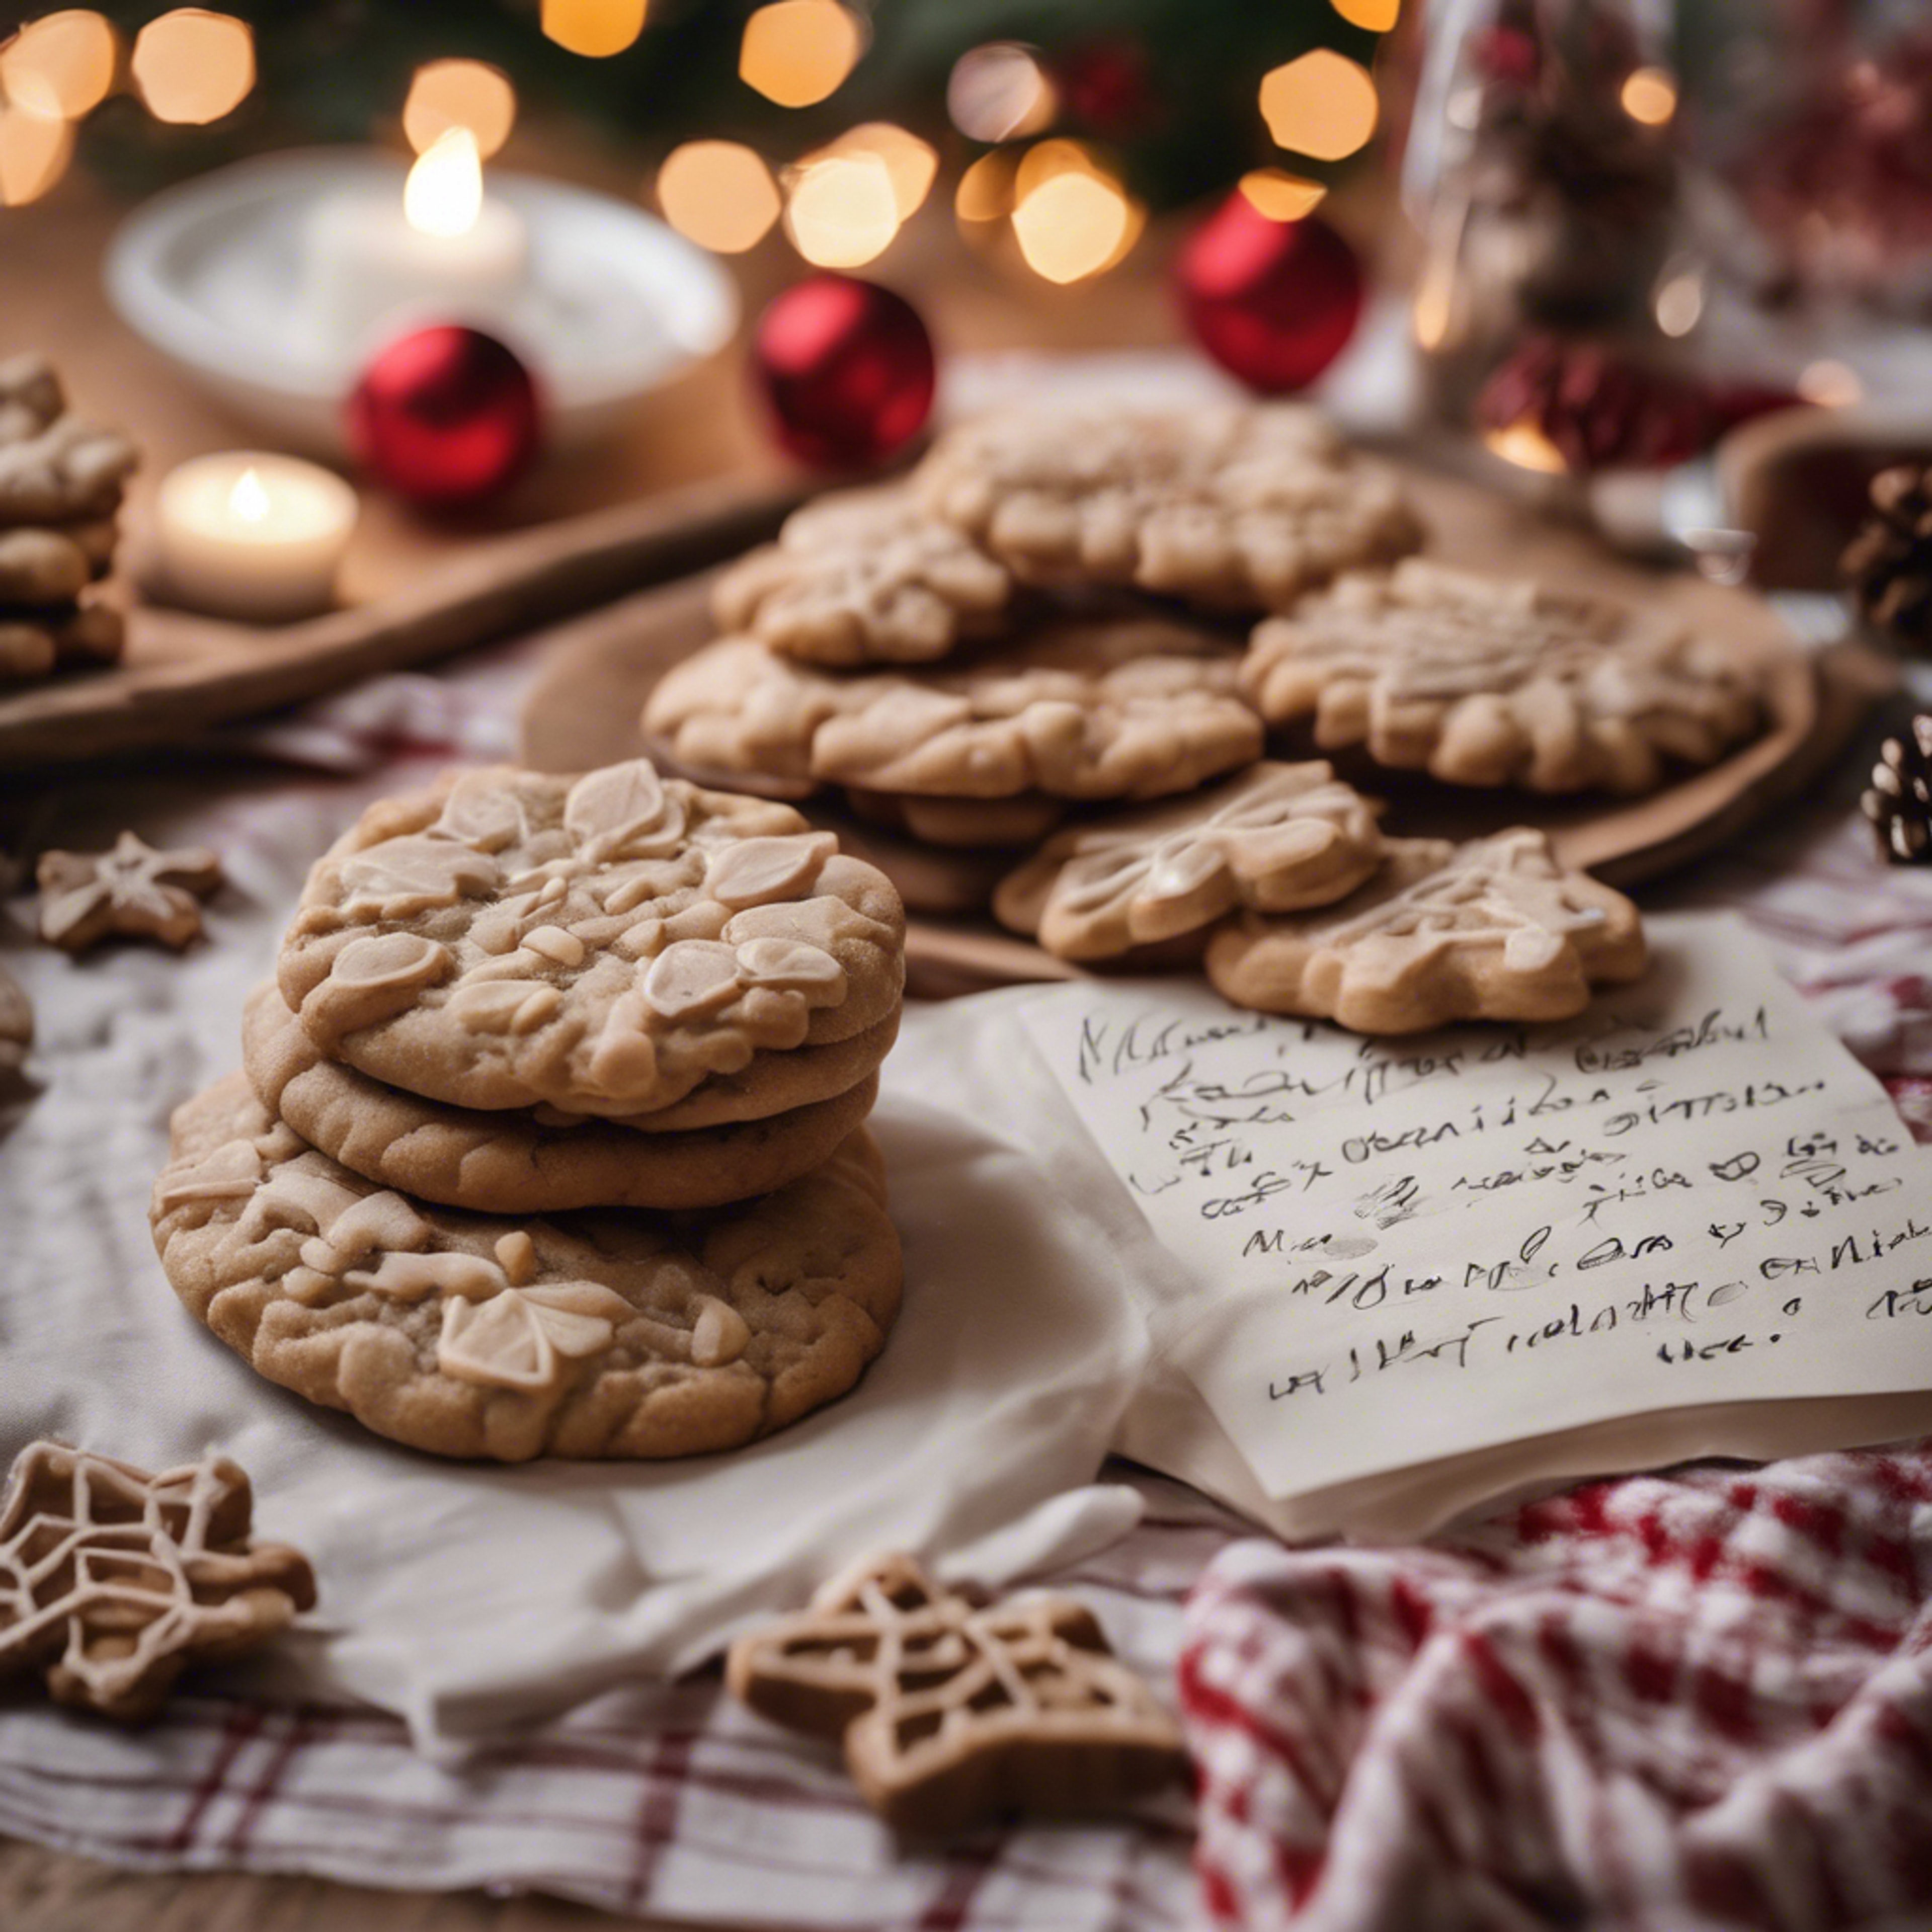 A spread of cozy, homemade Christmas cookies on a festive tablecloth, a glass of milk, and a note to Santa. Taustakuva[2a748ec29b0a47b6b2f7]